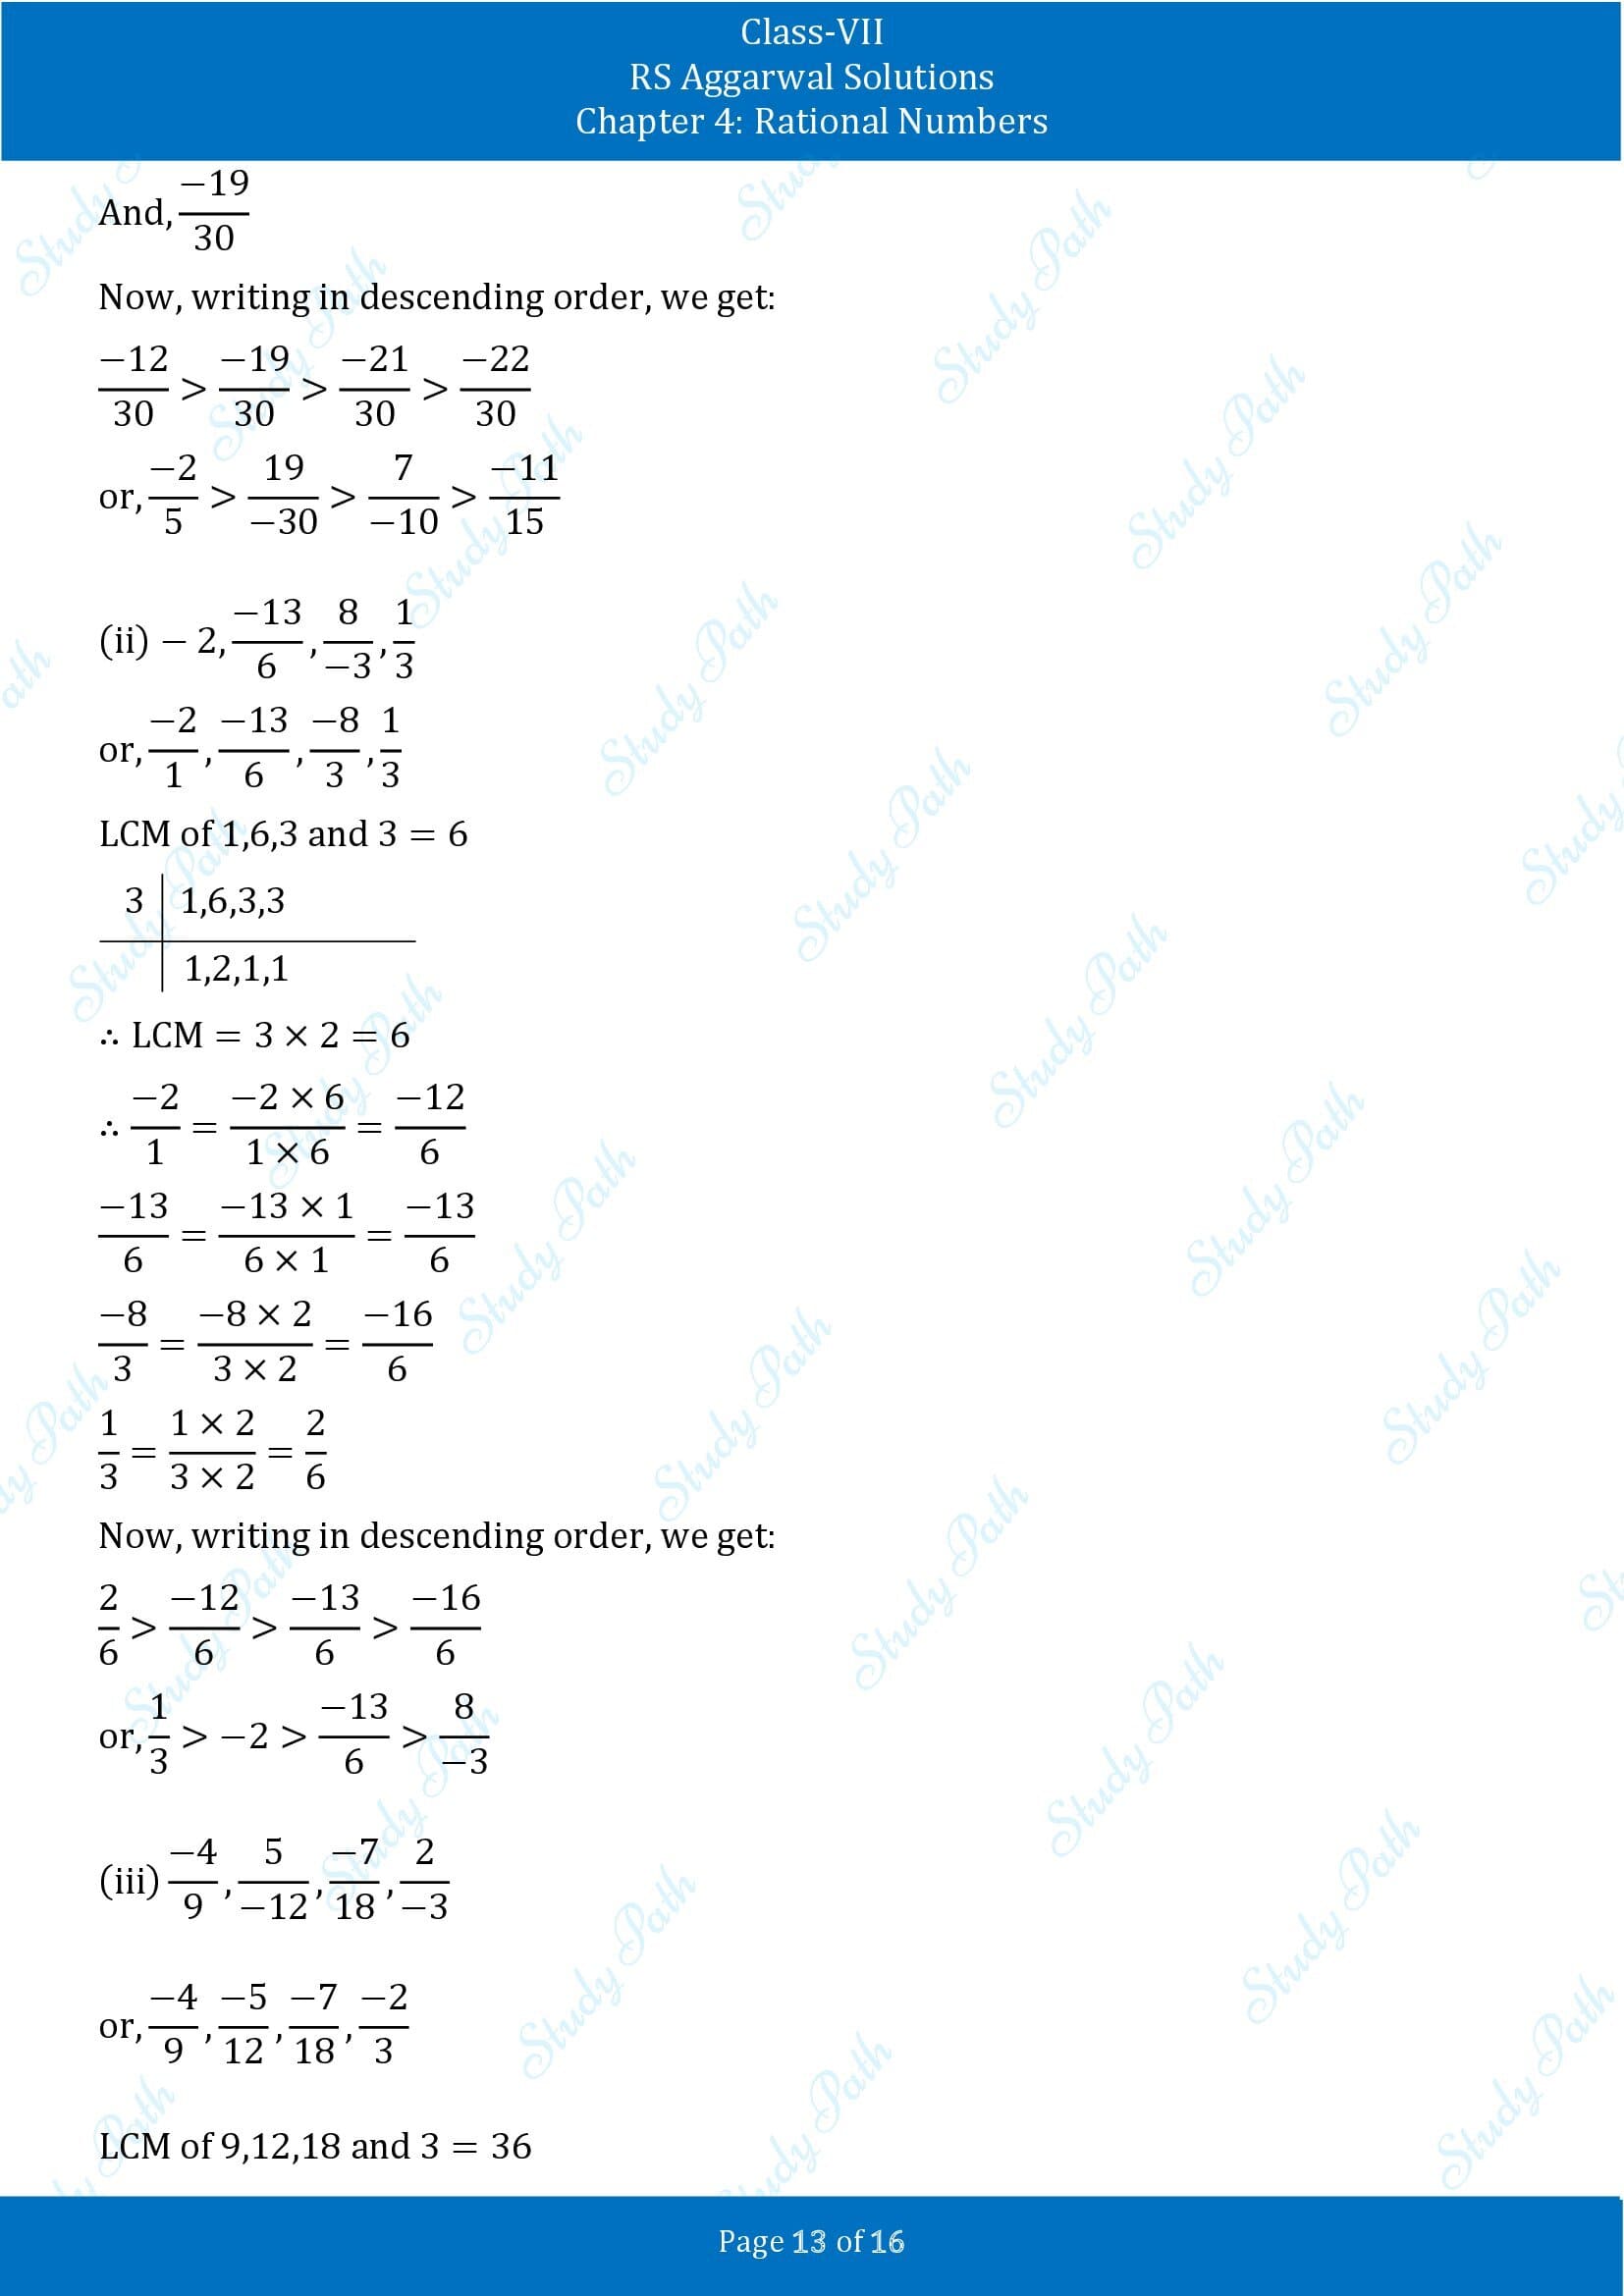 RS Aggarwal Solutions Class 7 Chapter 4 Rational Numbers Exercise 4B 00013